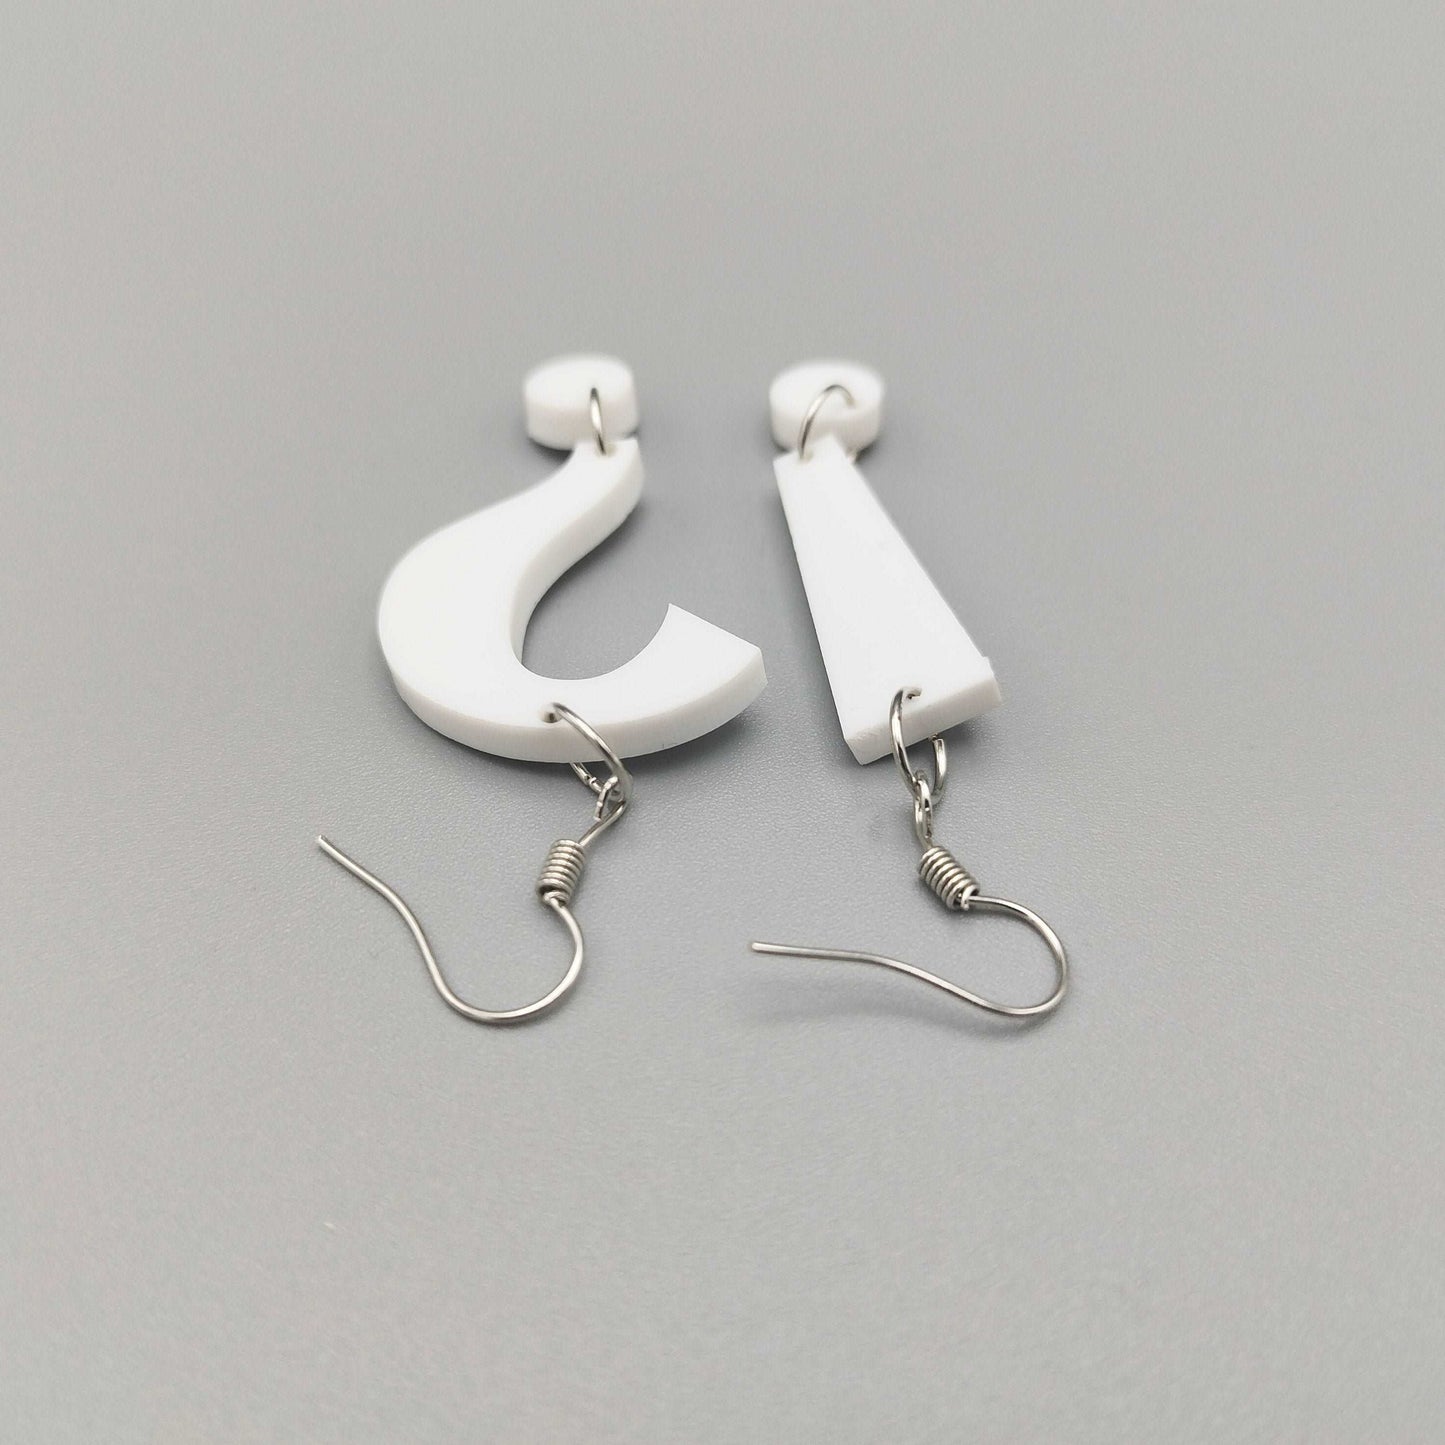 Mismatched Earrings Question and exclamation mark_01